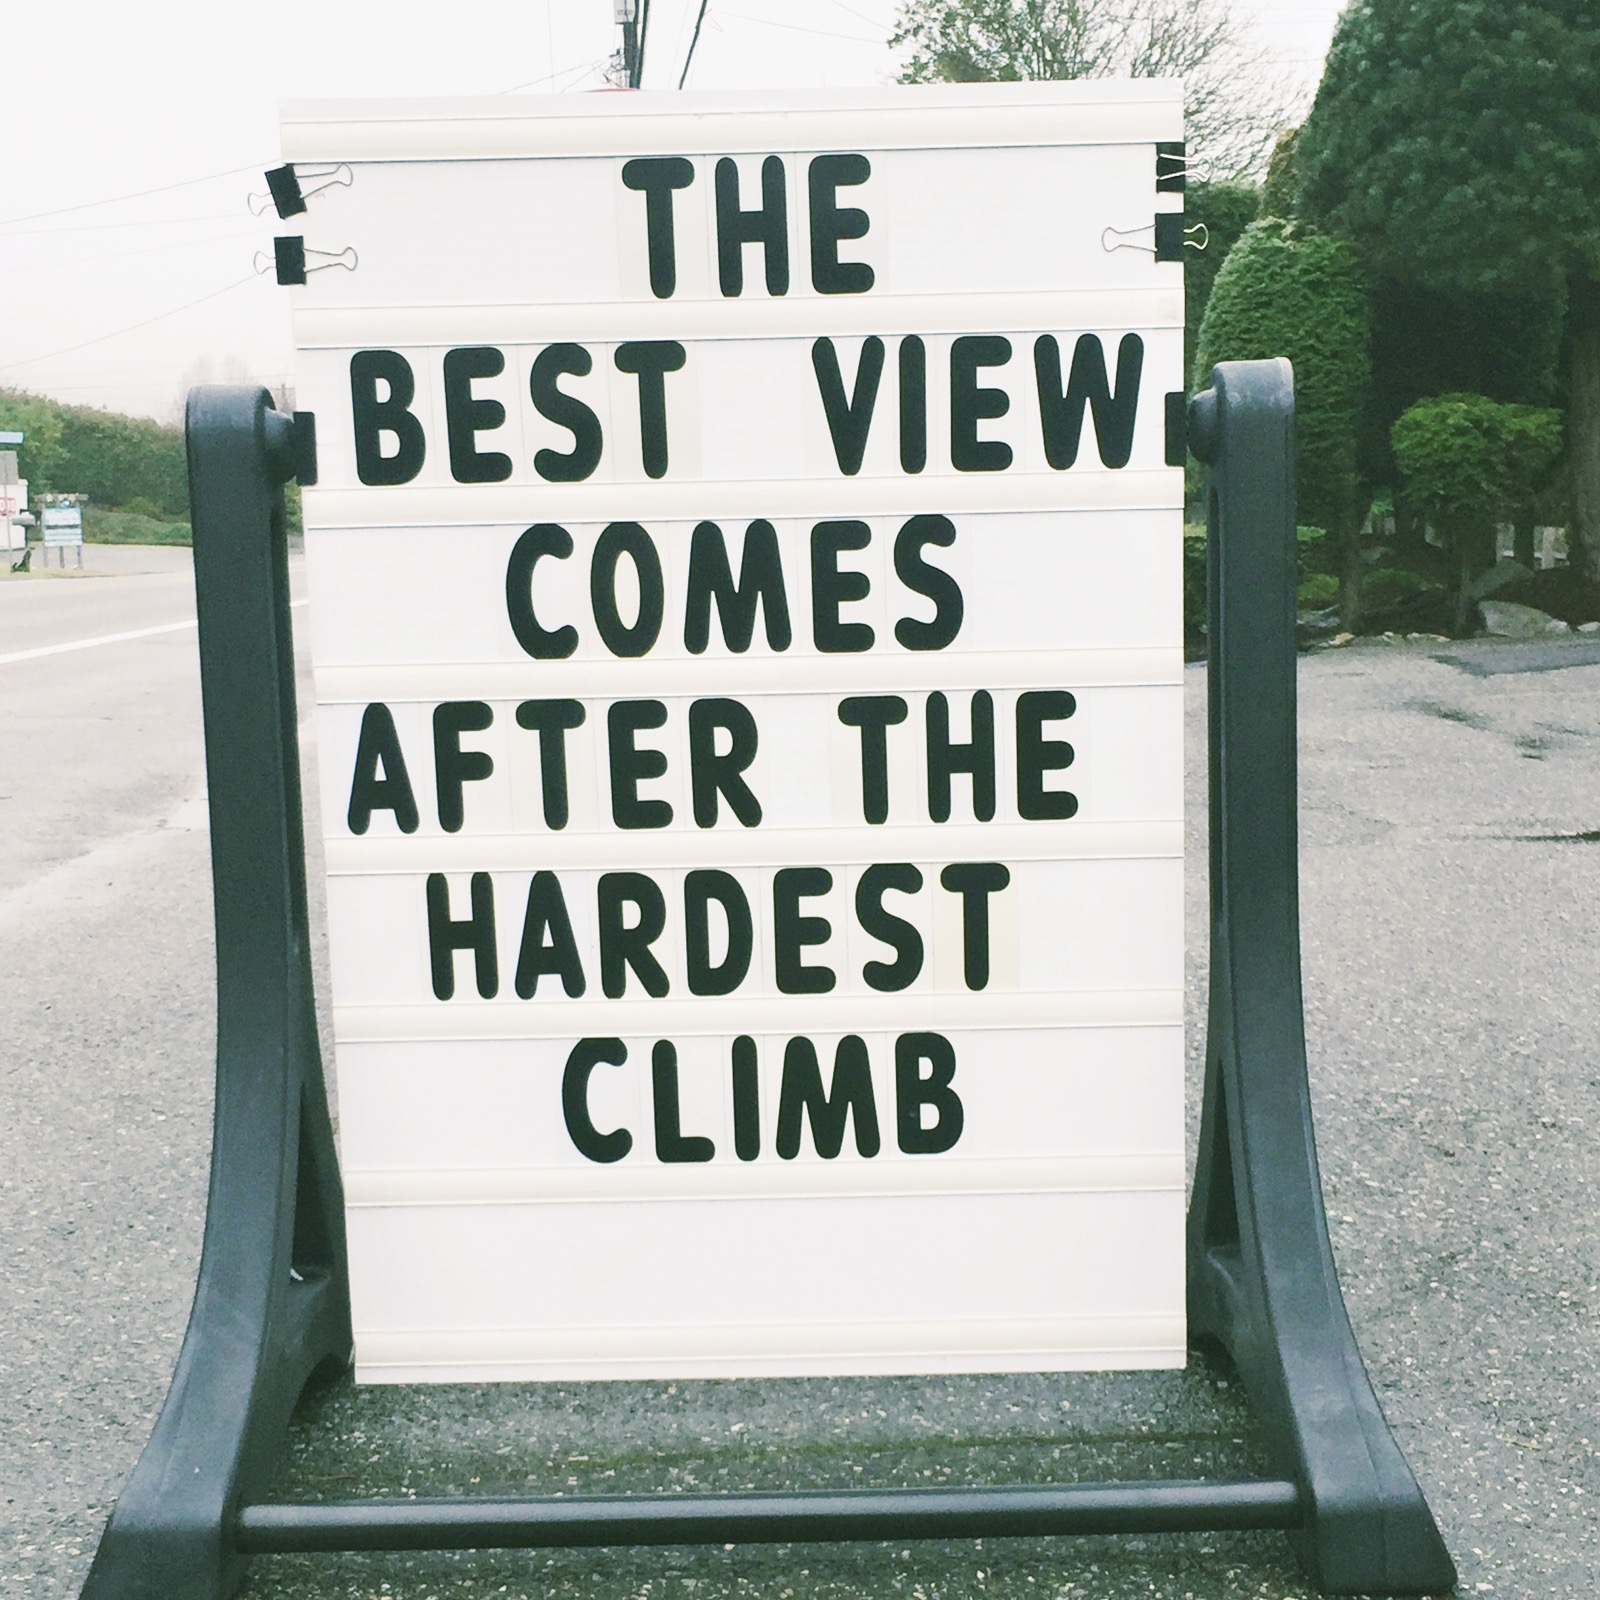 Quote_The Best View Comes After The Hardest Climb